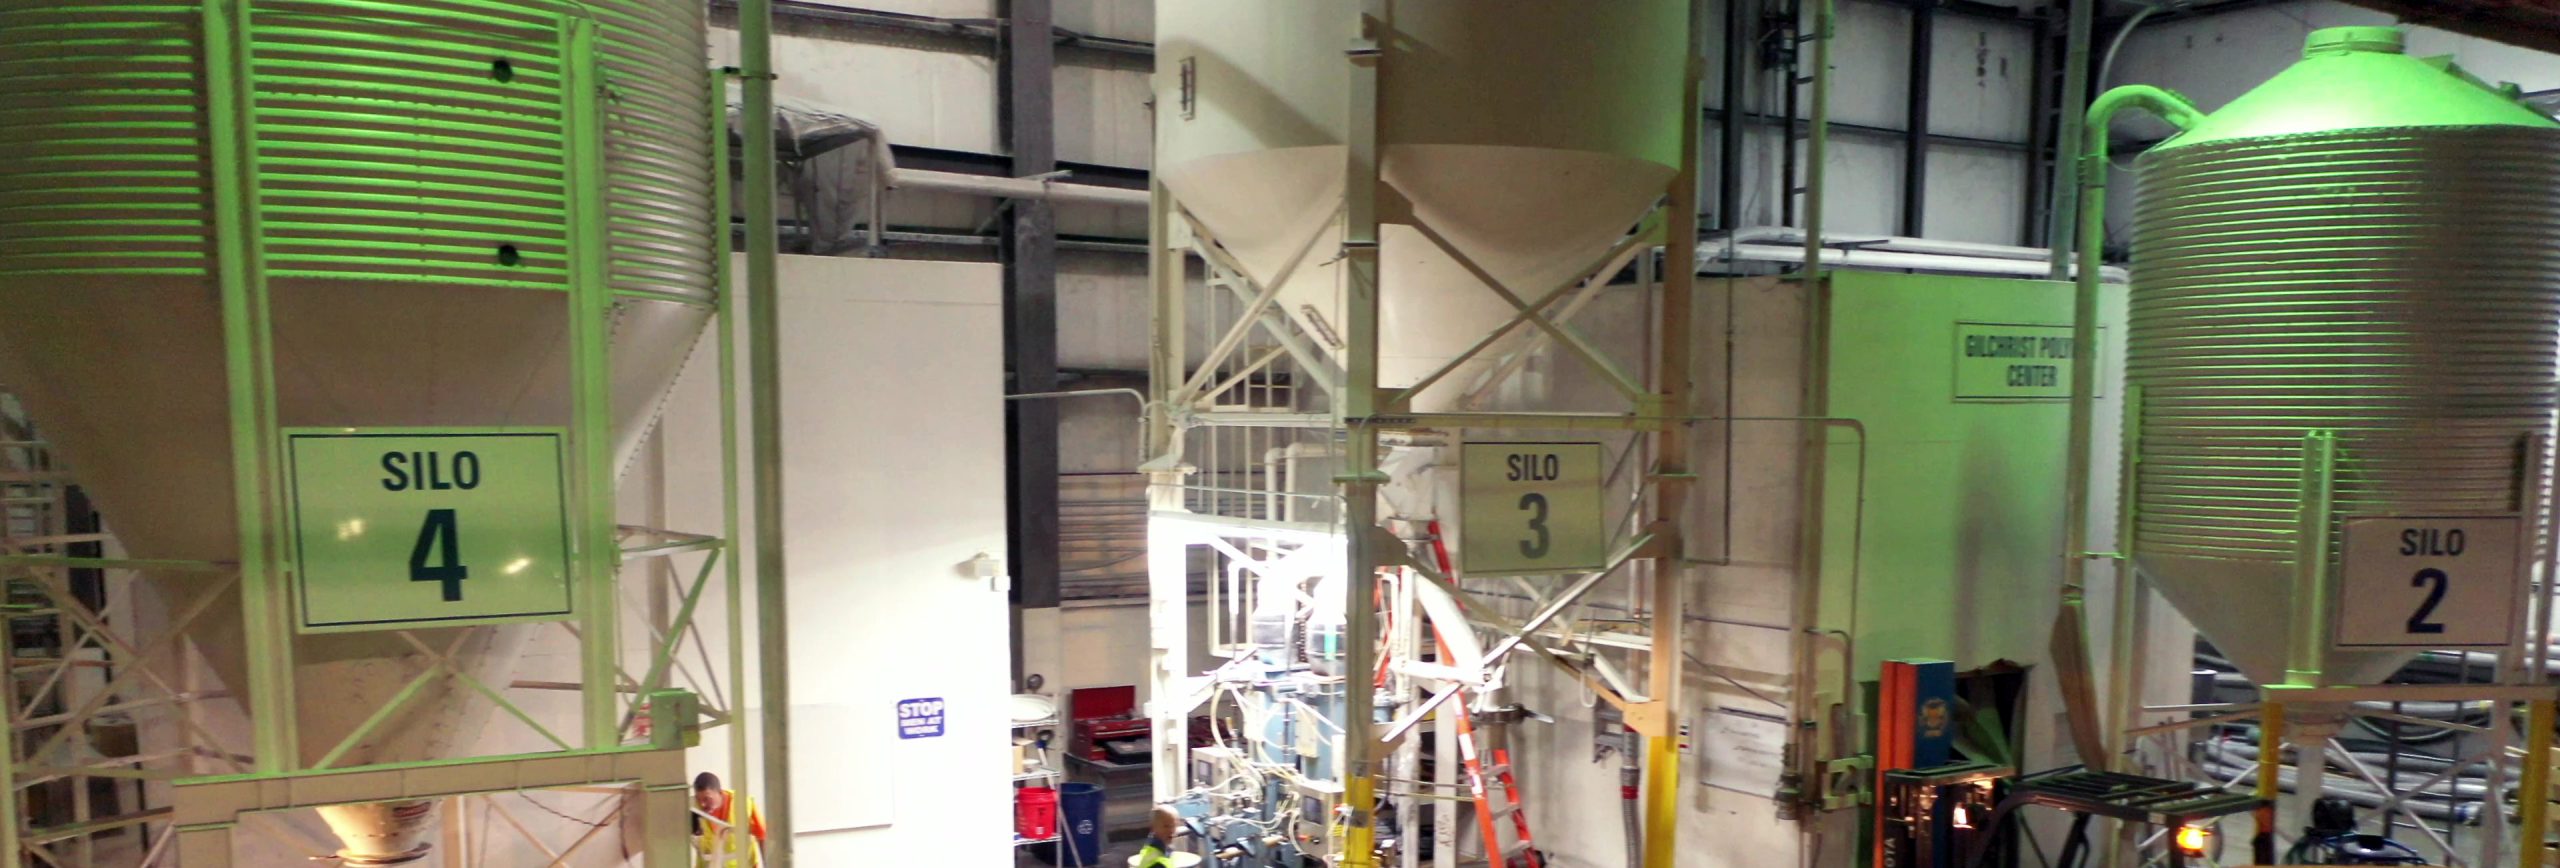 Three of ASW Global's silos are shown. The silos are part of ASW's polymer (resin) packaging stations.